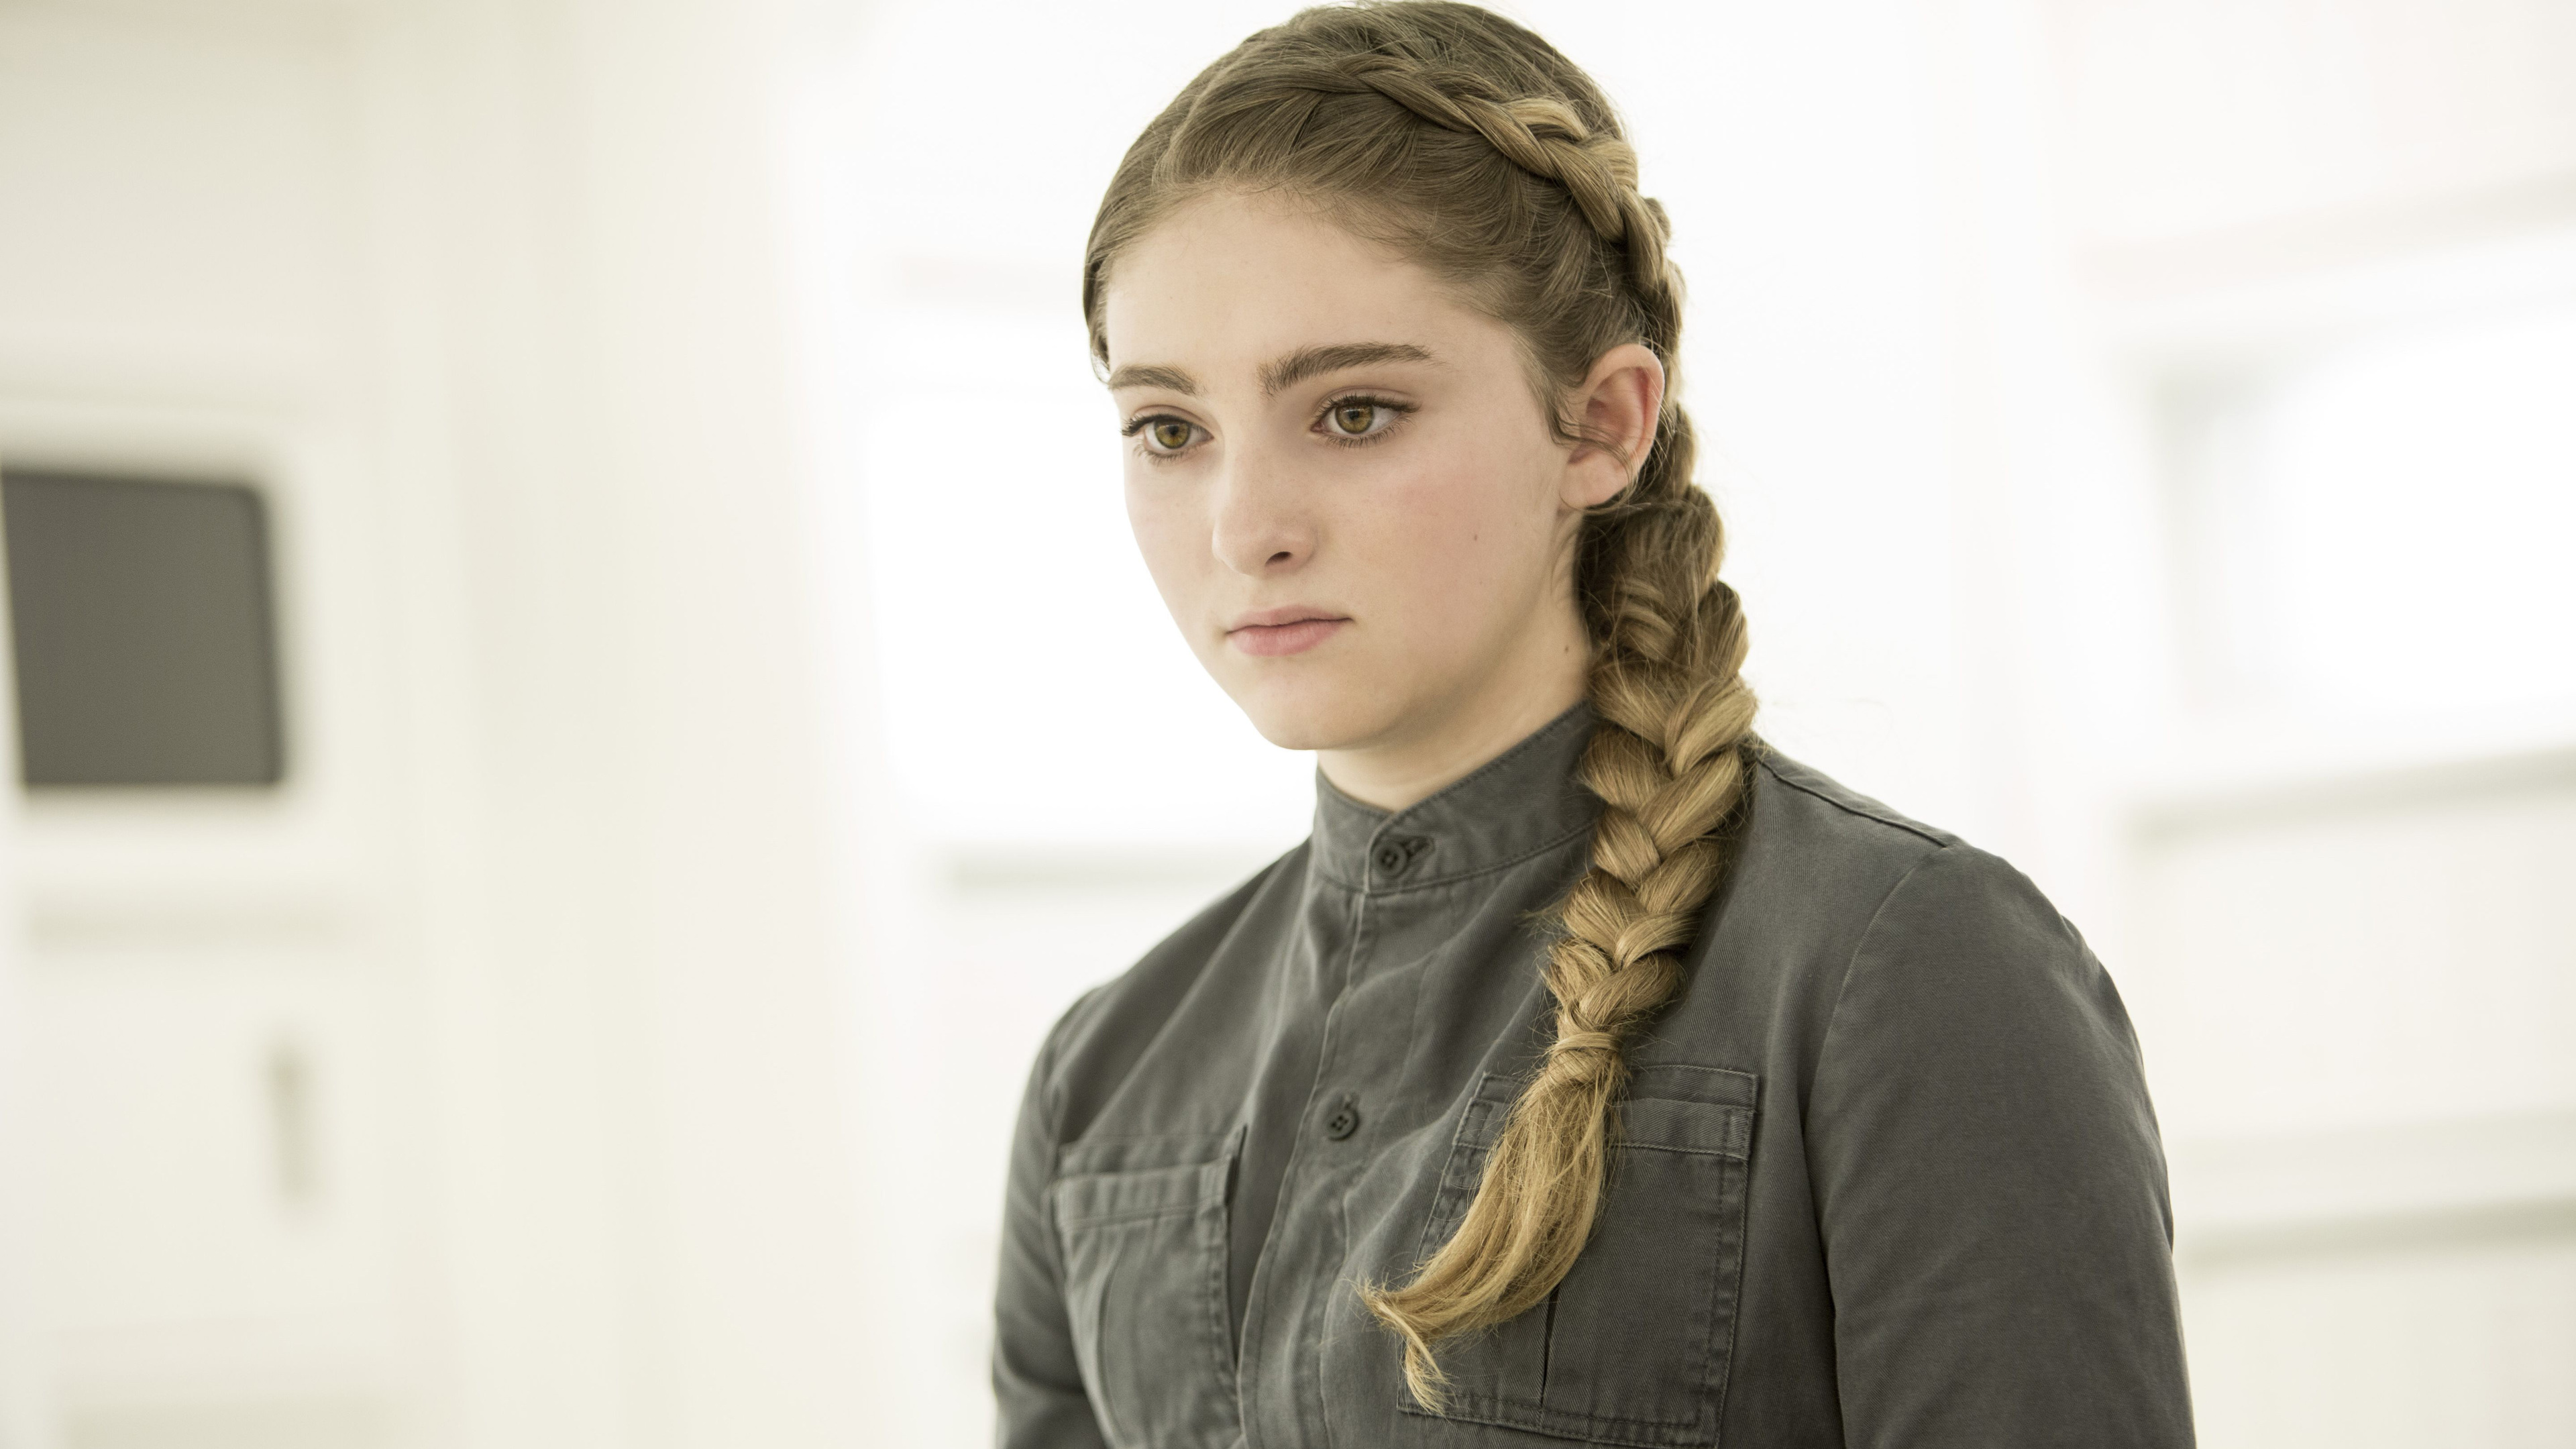 willow shields 5k 1536861600 - Willow Shields 5k - willow shields wallpapers, the hunger games wallpapers, hd-wallpapers, girls wallpapers, celebrities wallpapers, 5k wallpapers, 4k-wallpapers